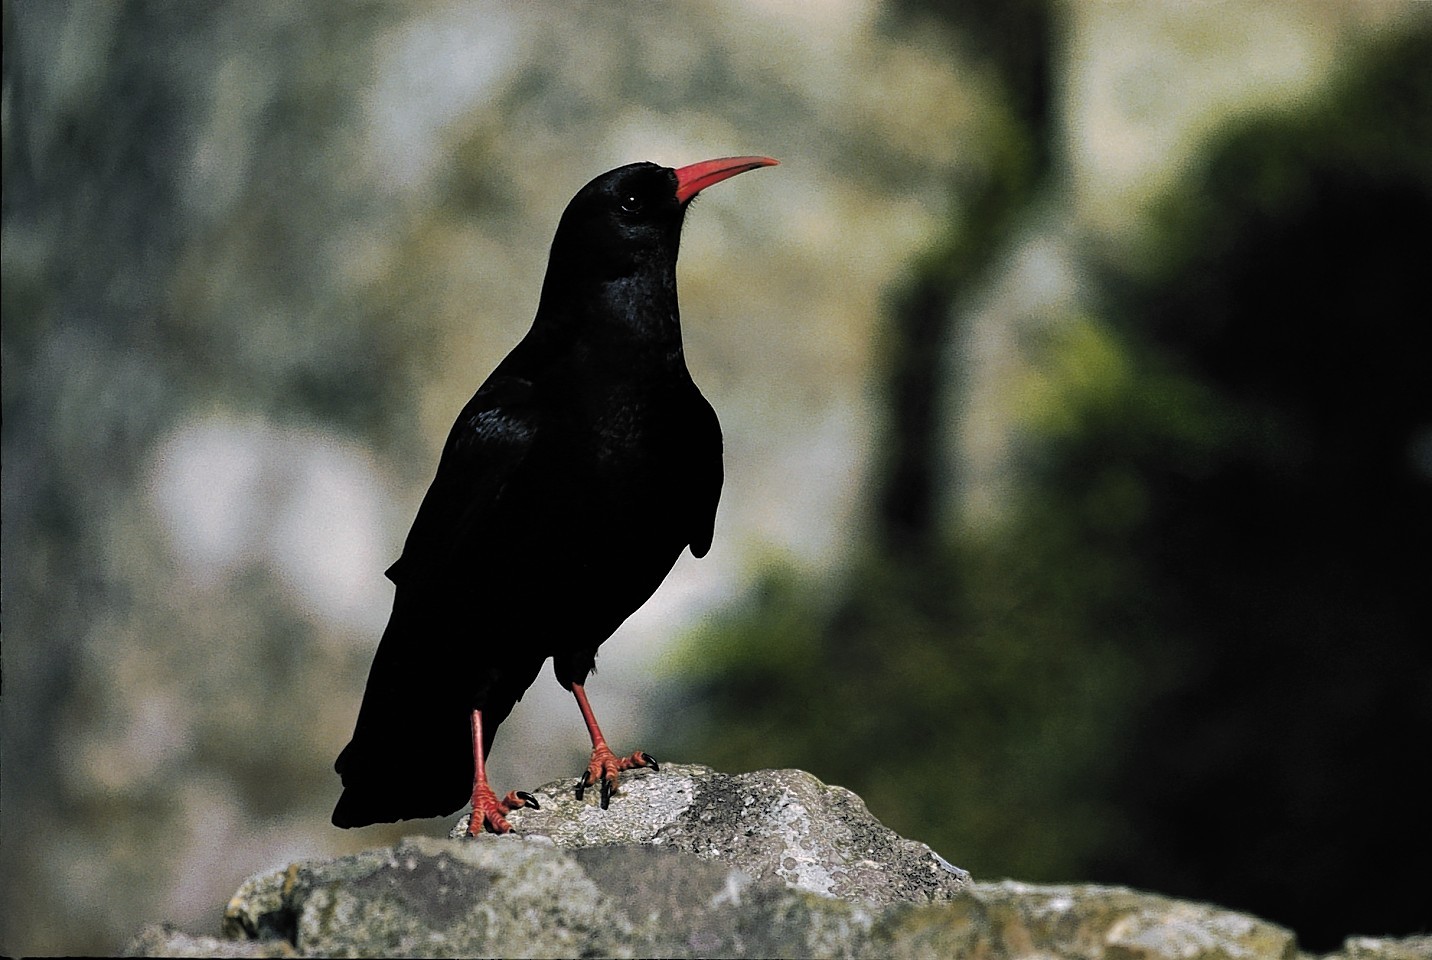 Choughs are resident on Islay